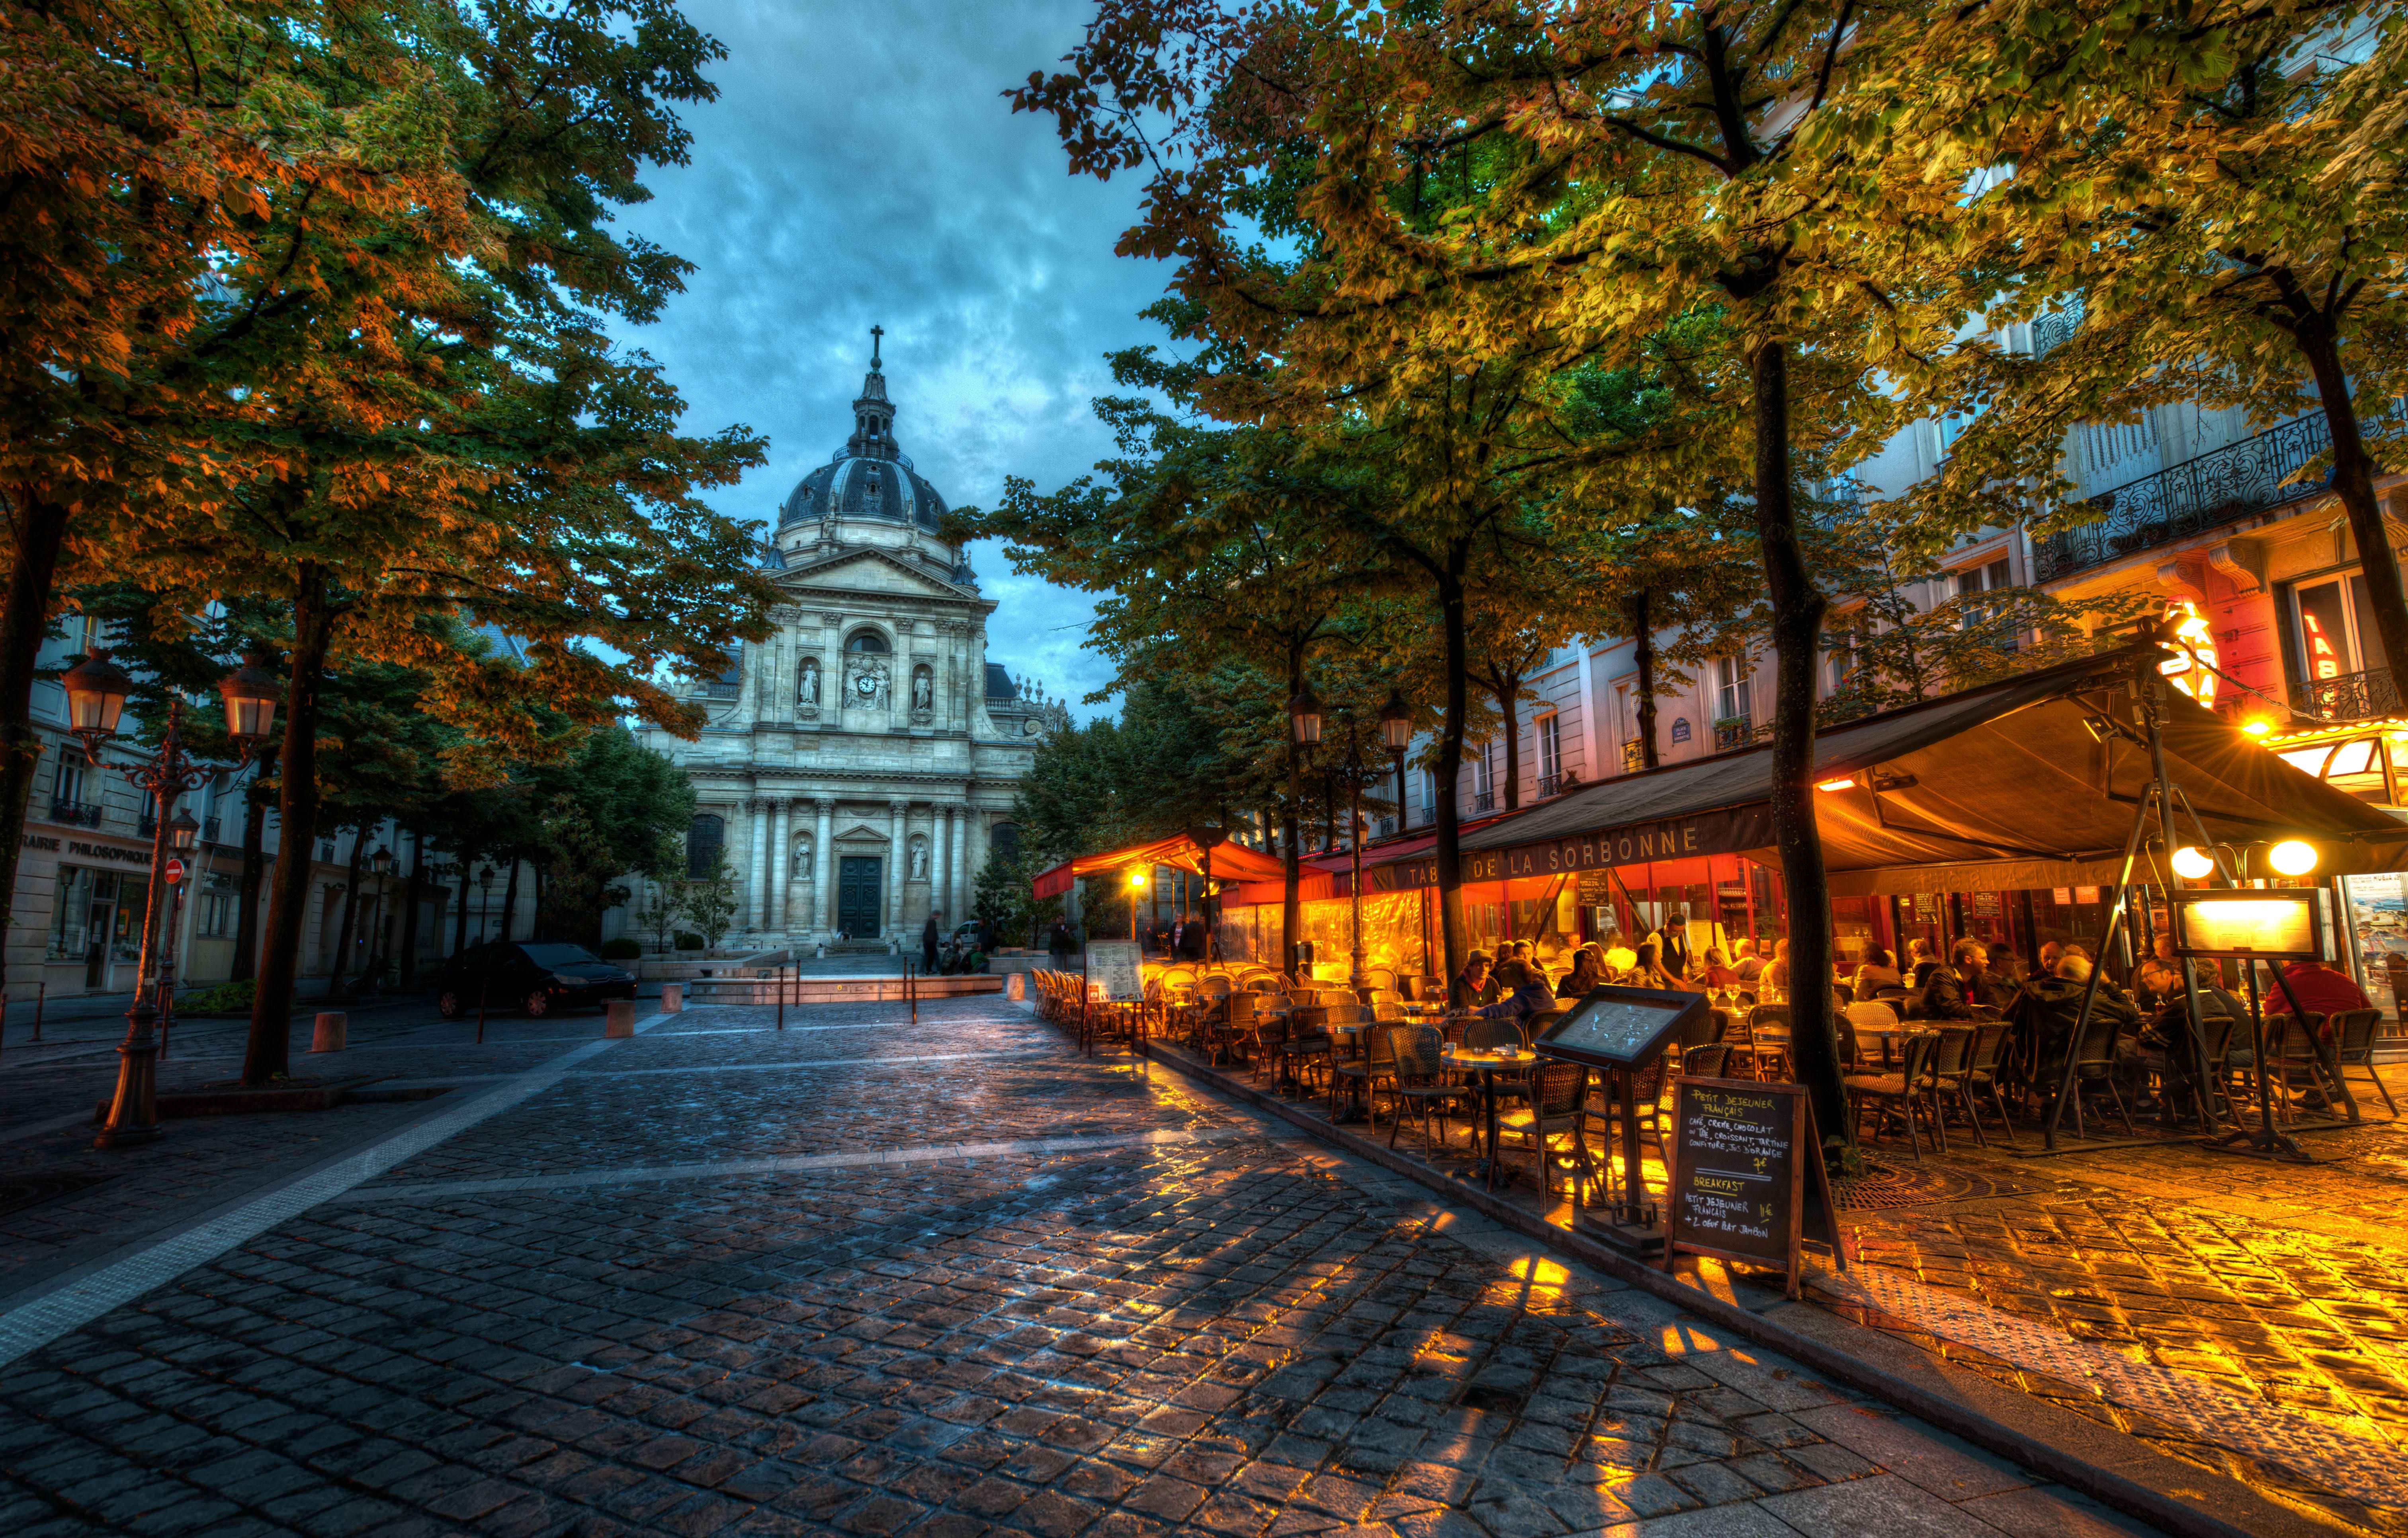 Here Is The Famous Sorbonne University In Evening Paris